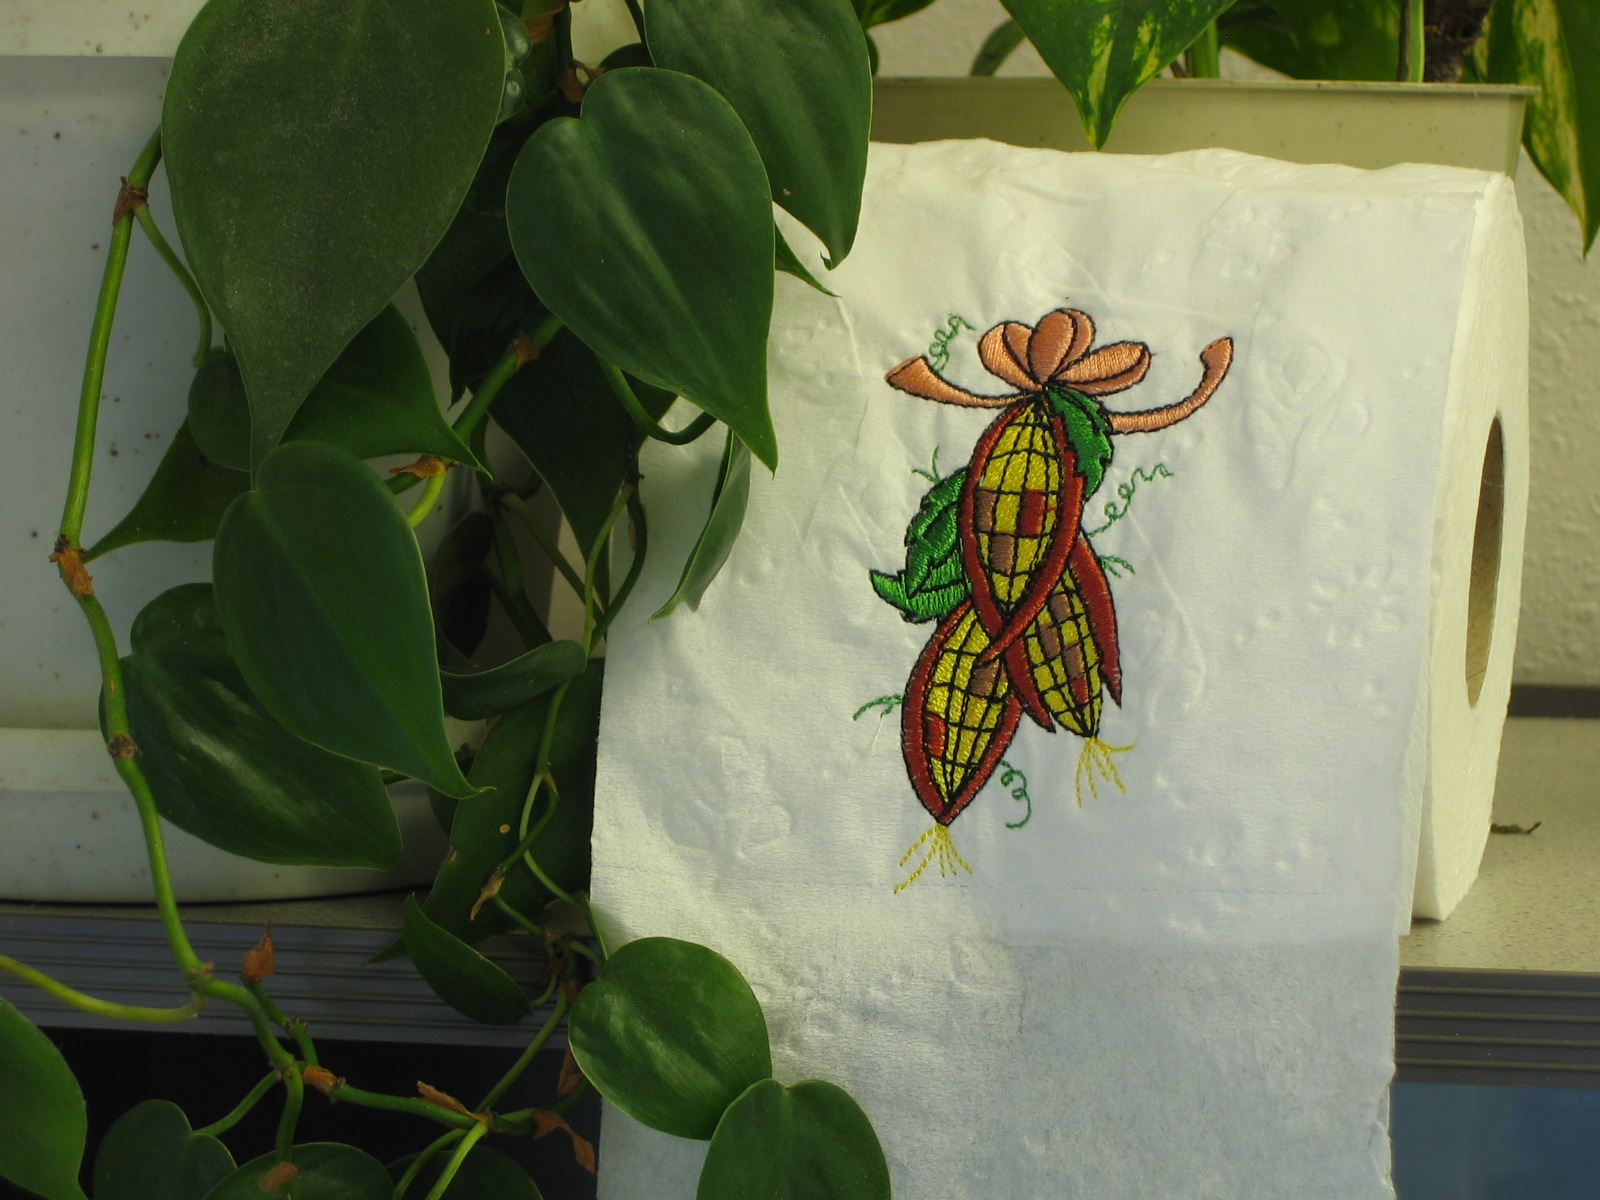 Embroidery.com - Embroidery on Toilet Paper!